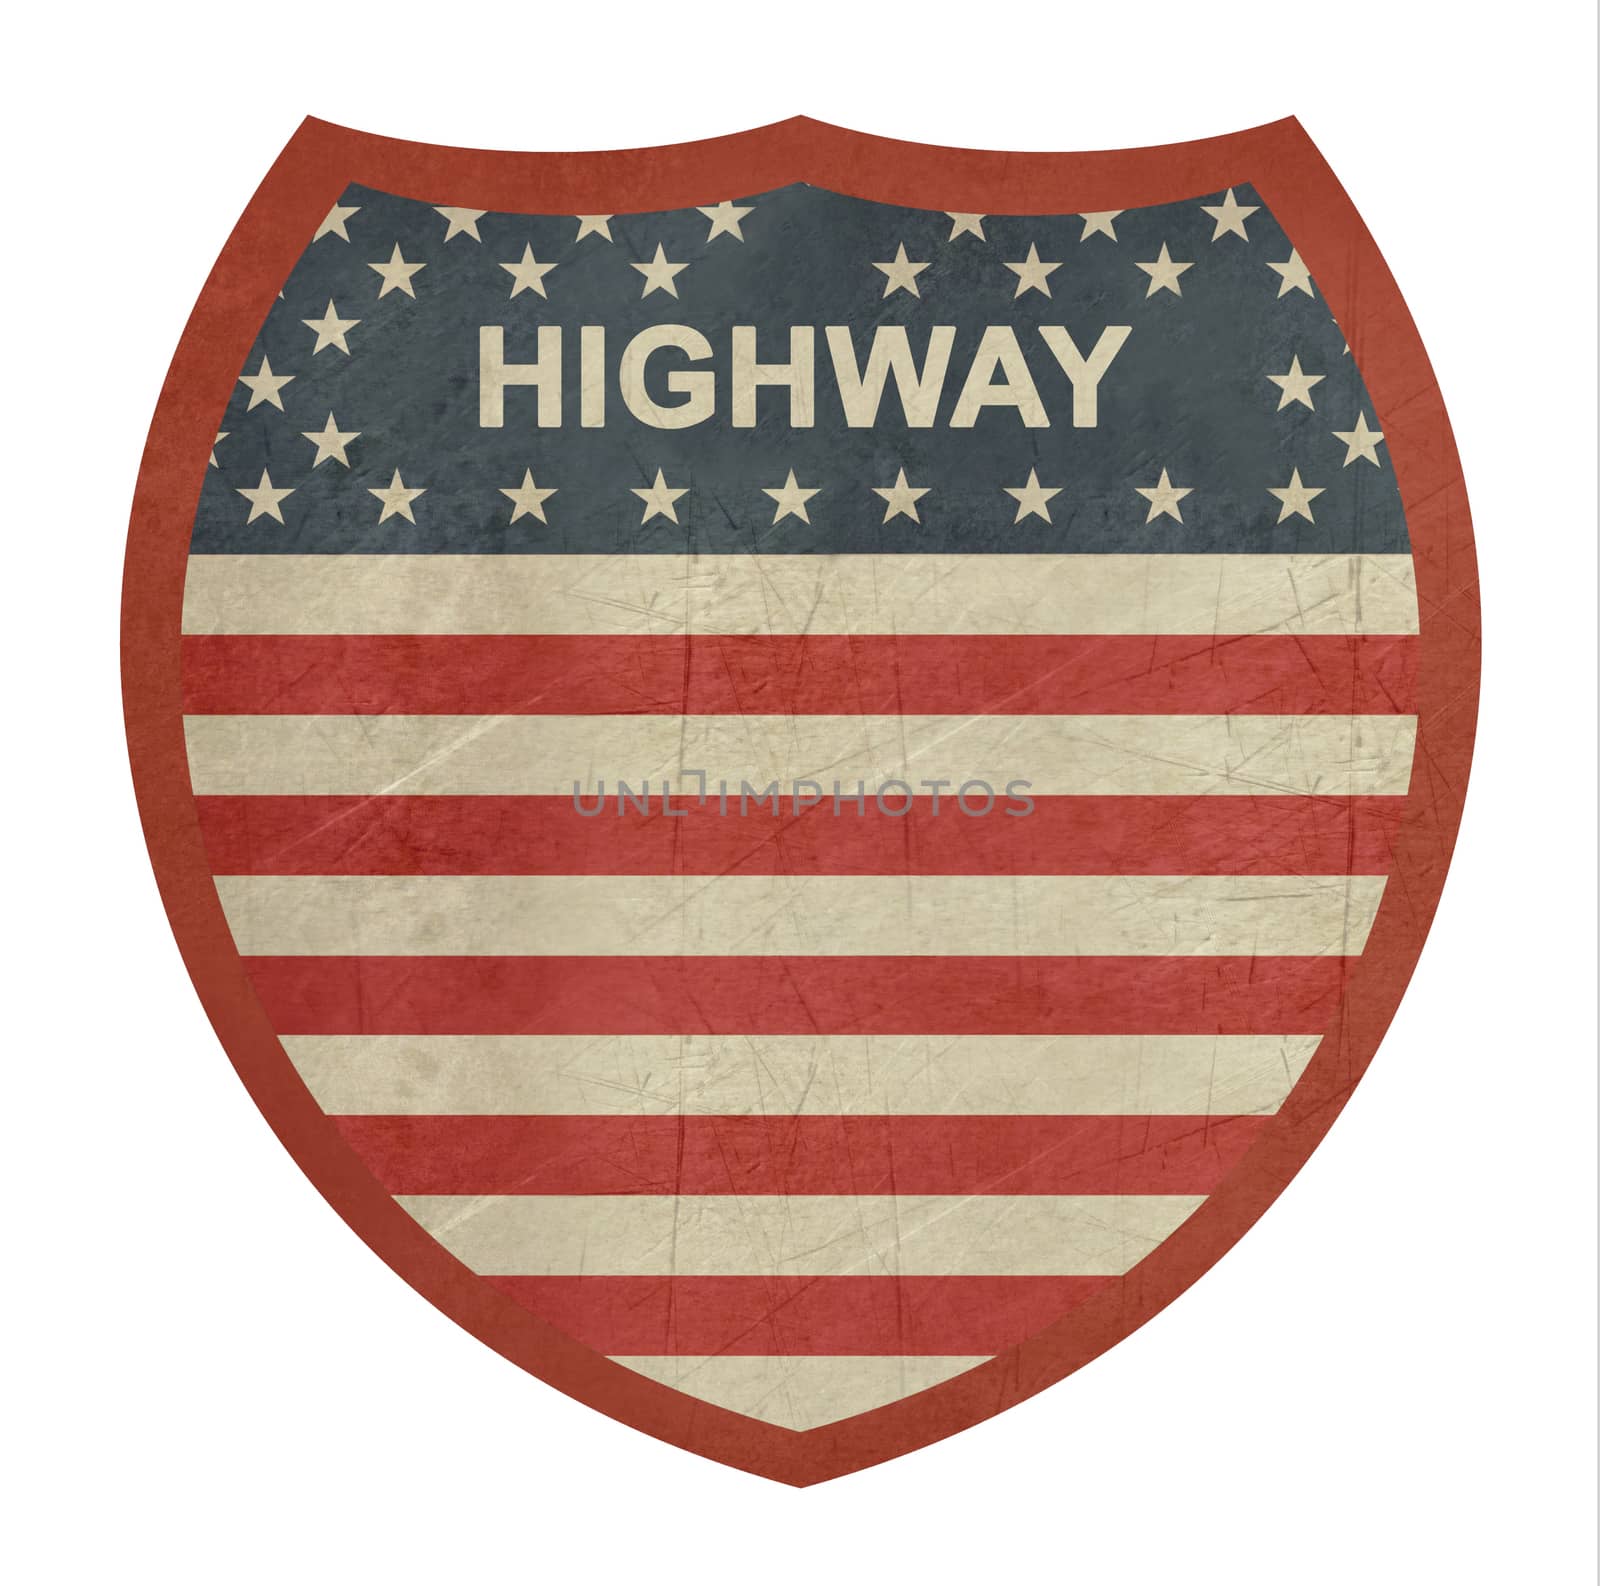 Grunge American interstate highway sign isolated on a white background.